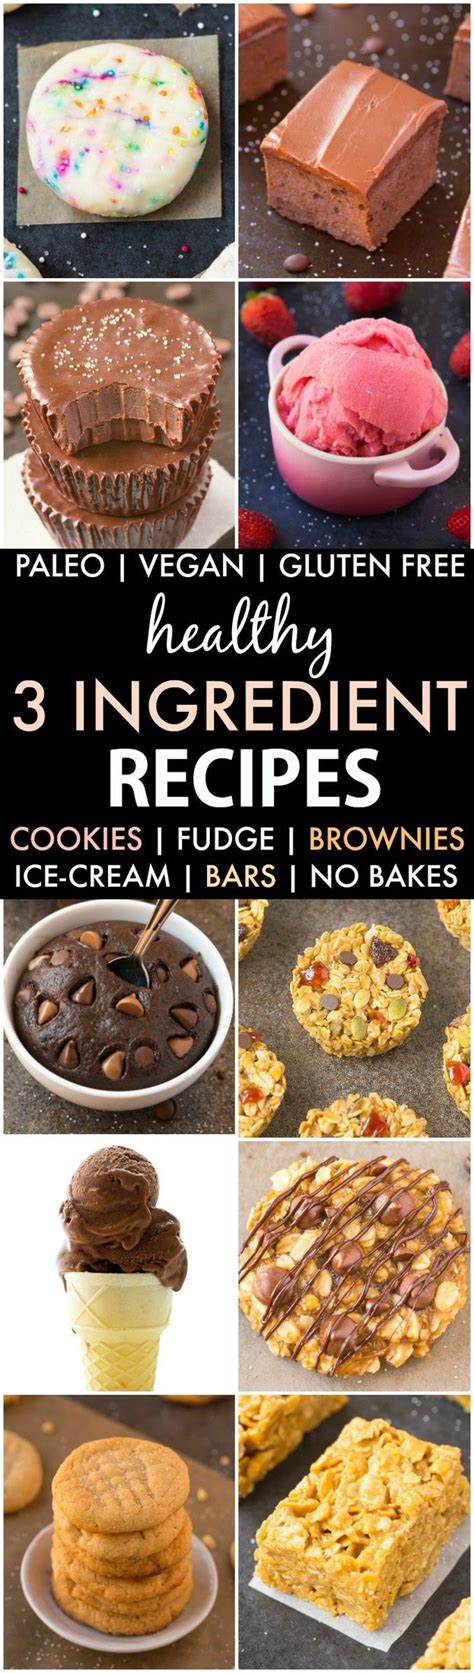 Healthy 3 Ingredient Snack And Dessert Recipes